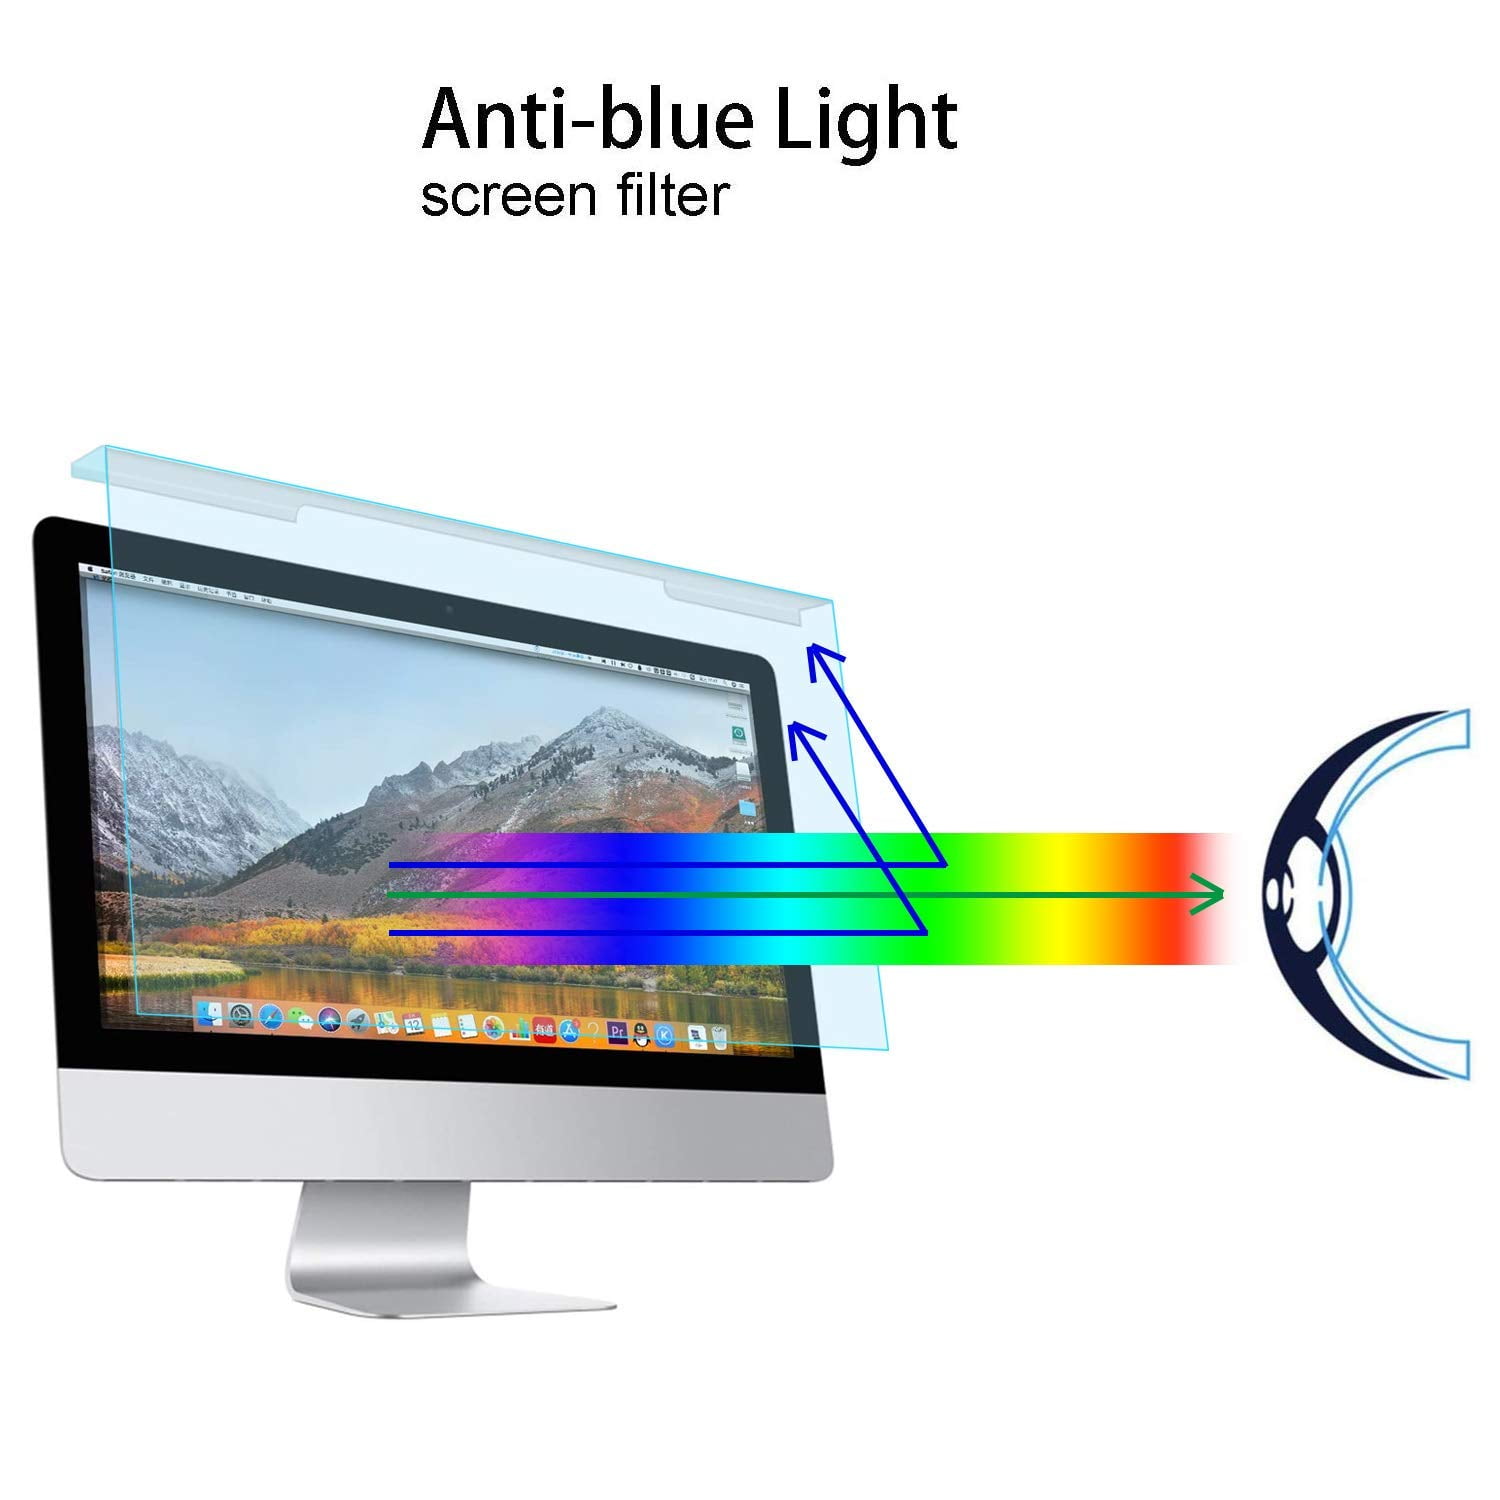 22.04x14.17 inch/LxW 23.8 Anti-UV Eye Protection Filter Film for Diagonal 23 FiiMoo 23-24 inch Computer Universal Blue Light Blocking Screen Protector 23.6 24 inch 16:9/16:10 Desktop PC Monitor